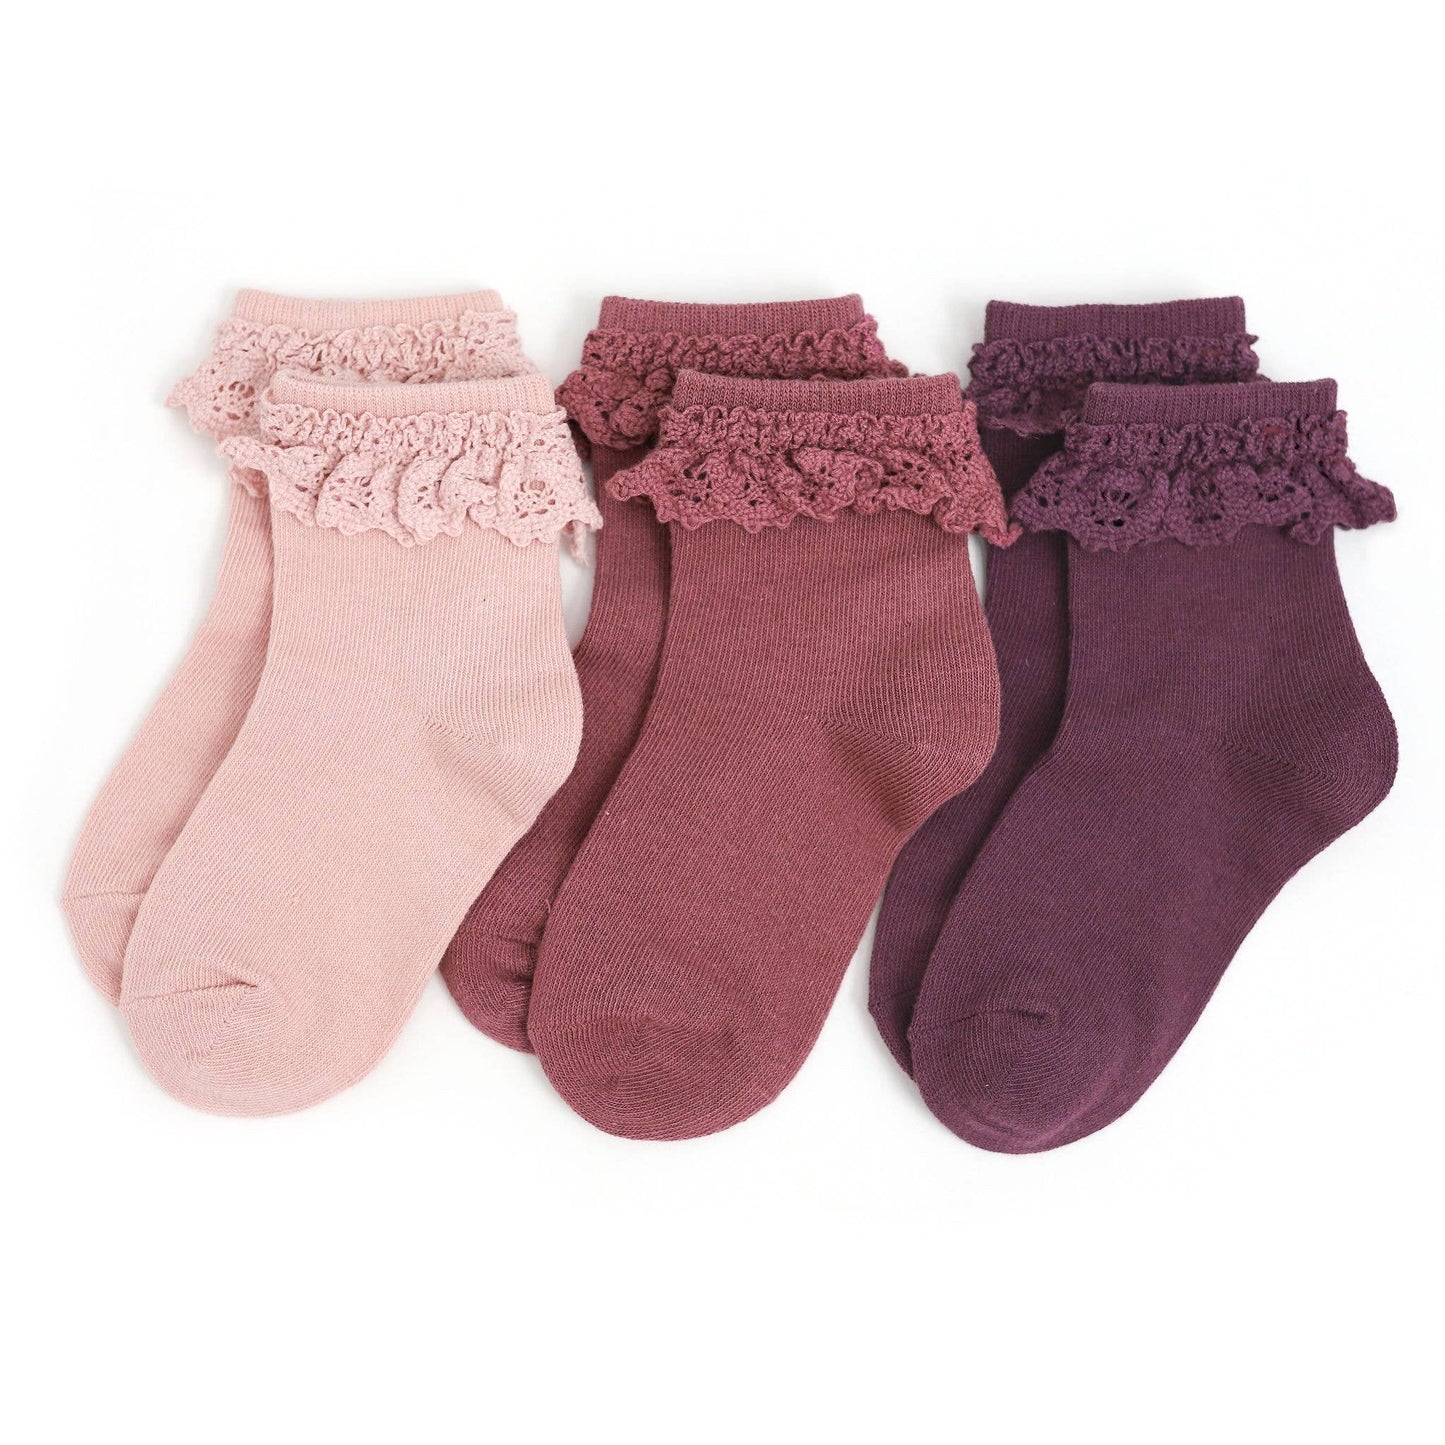 Little Stocking Co. - Sugar Plum Lace Midi Sock 3-Pack: 6-18 MONTHS